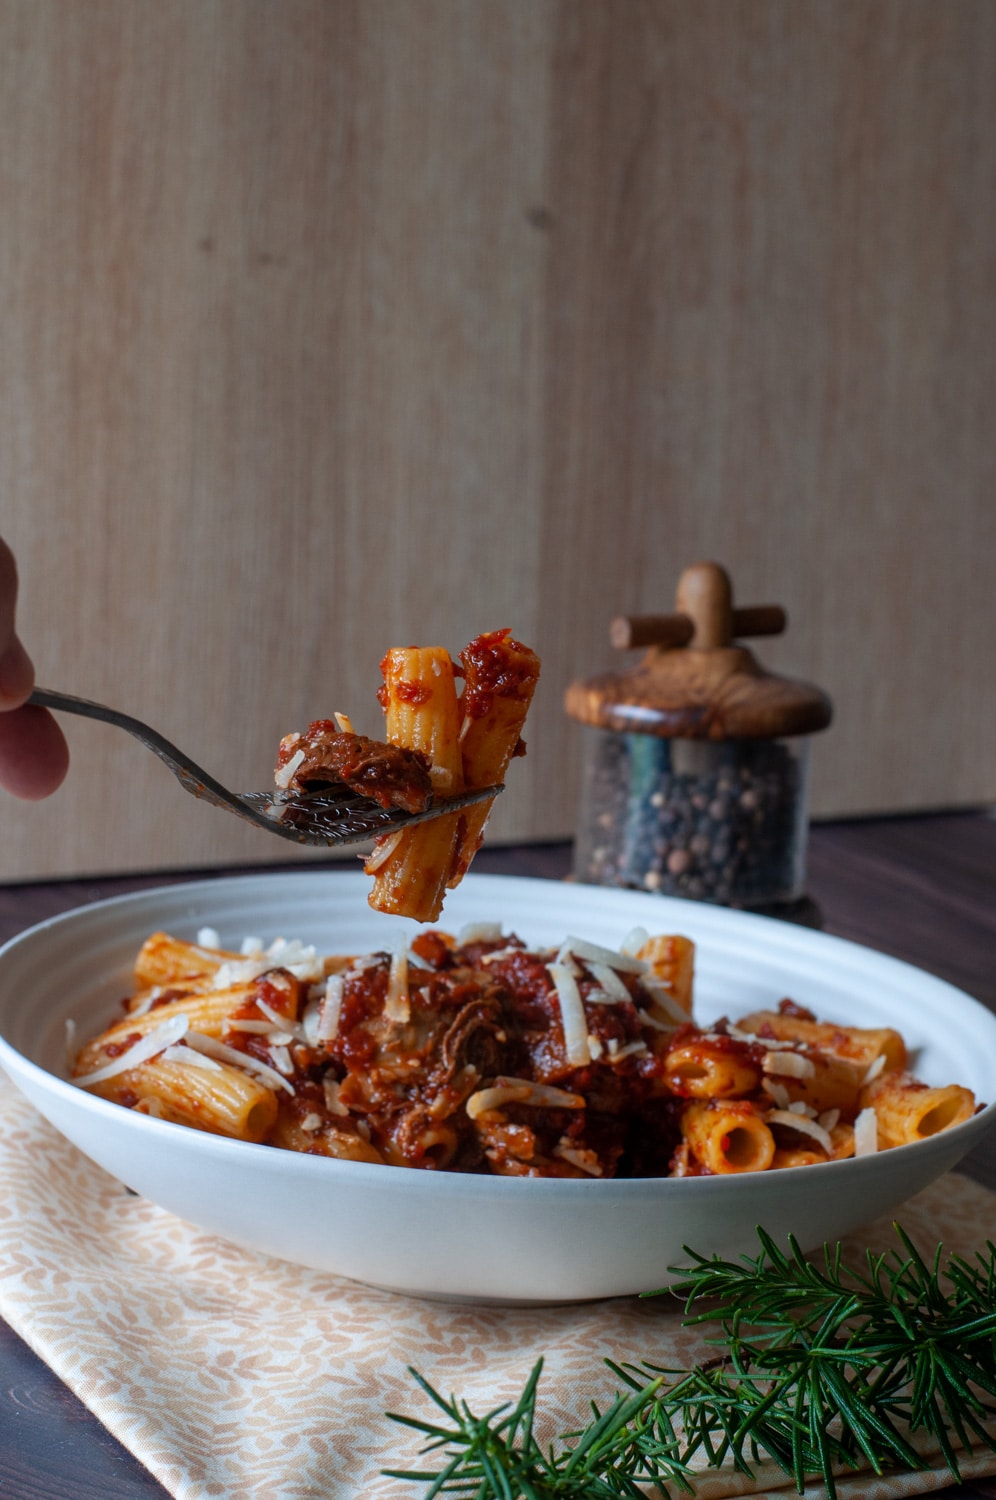 Lamb ragu with pasta on a fork